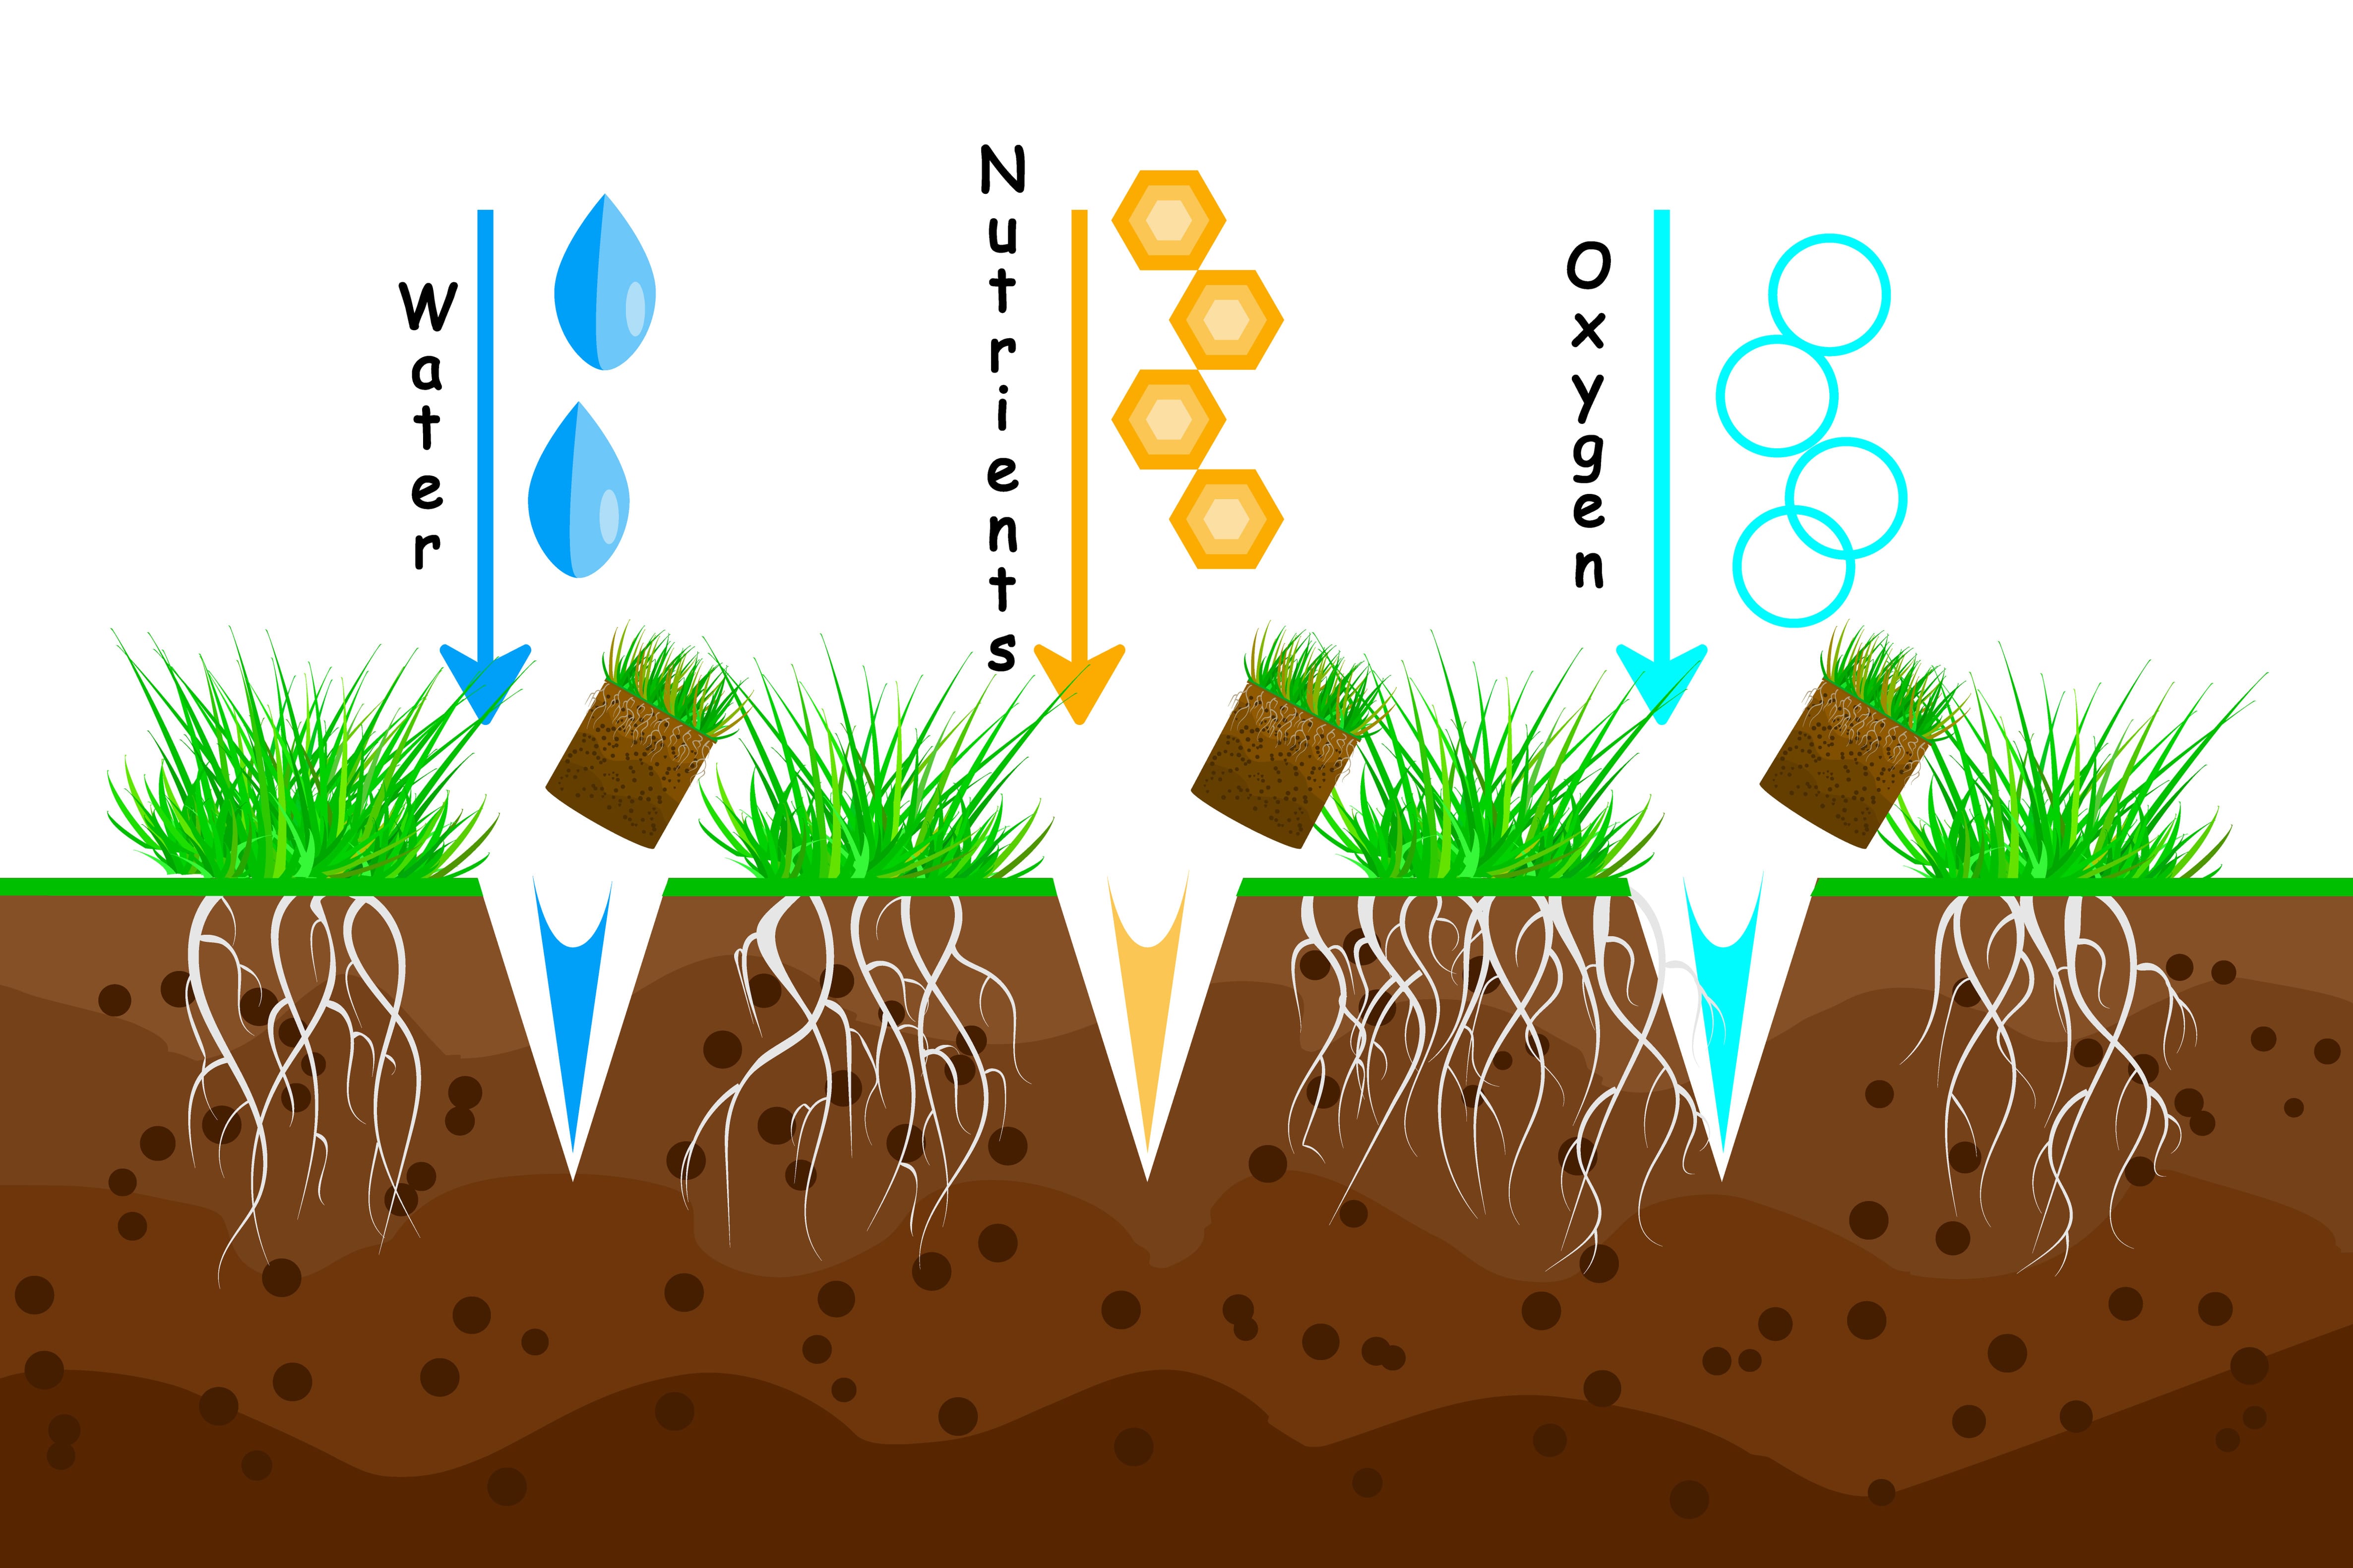 Lawn aeration. Lawn grass care service, gardening and landscape design. Waste of aeration technique used in the upkeep of lawns and turf. Lawn maintenance. Illustration for article, infographics or instruction. Stock vector